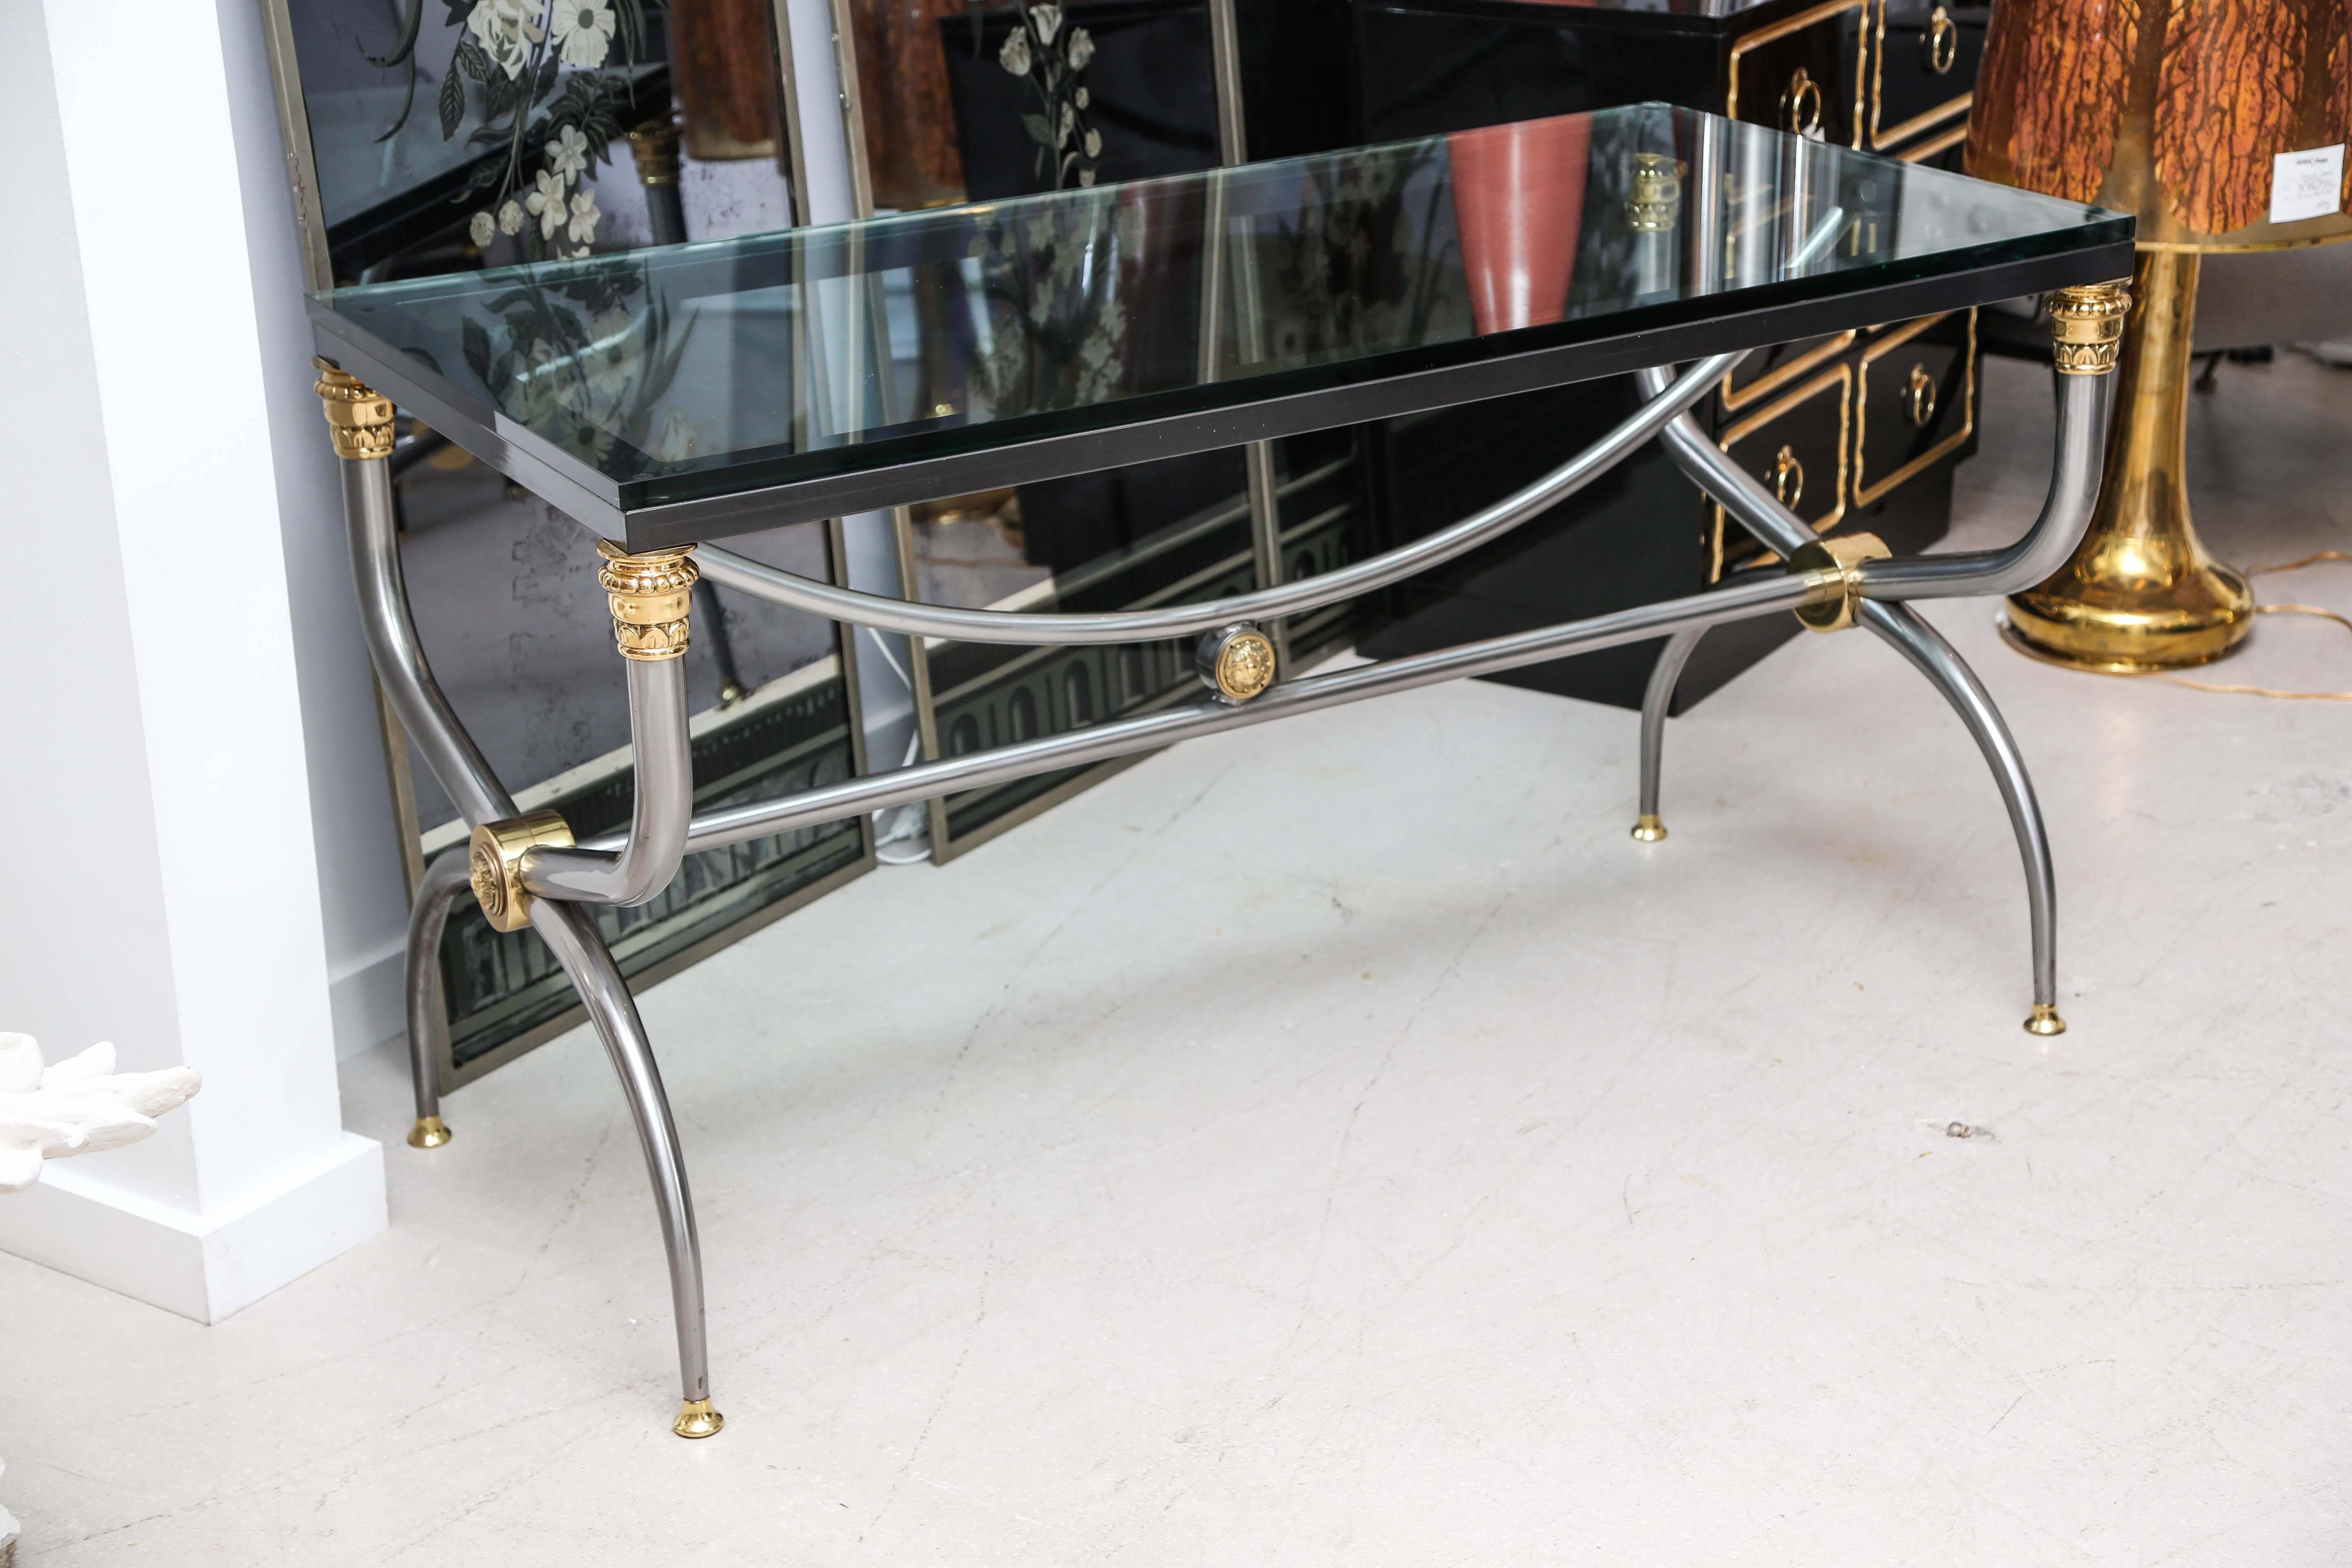 Two-tone Neoclassical style center table or desk with thick glass top.